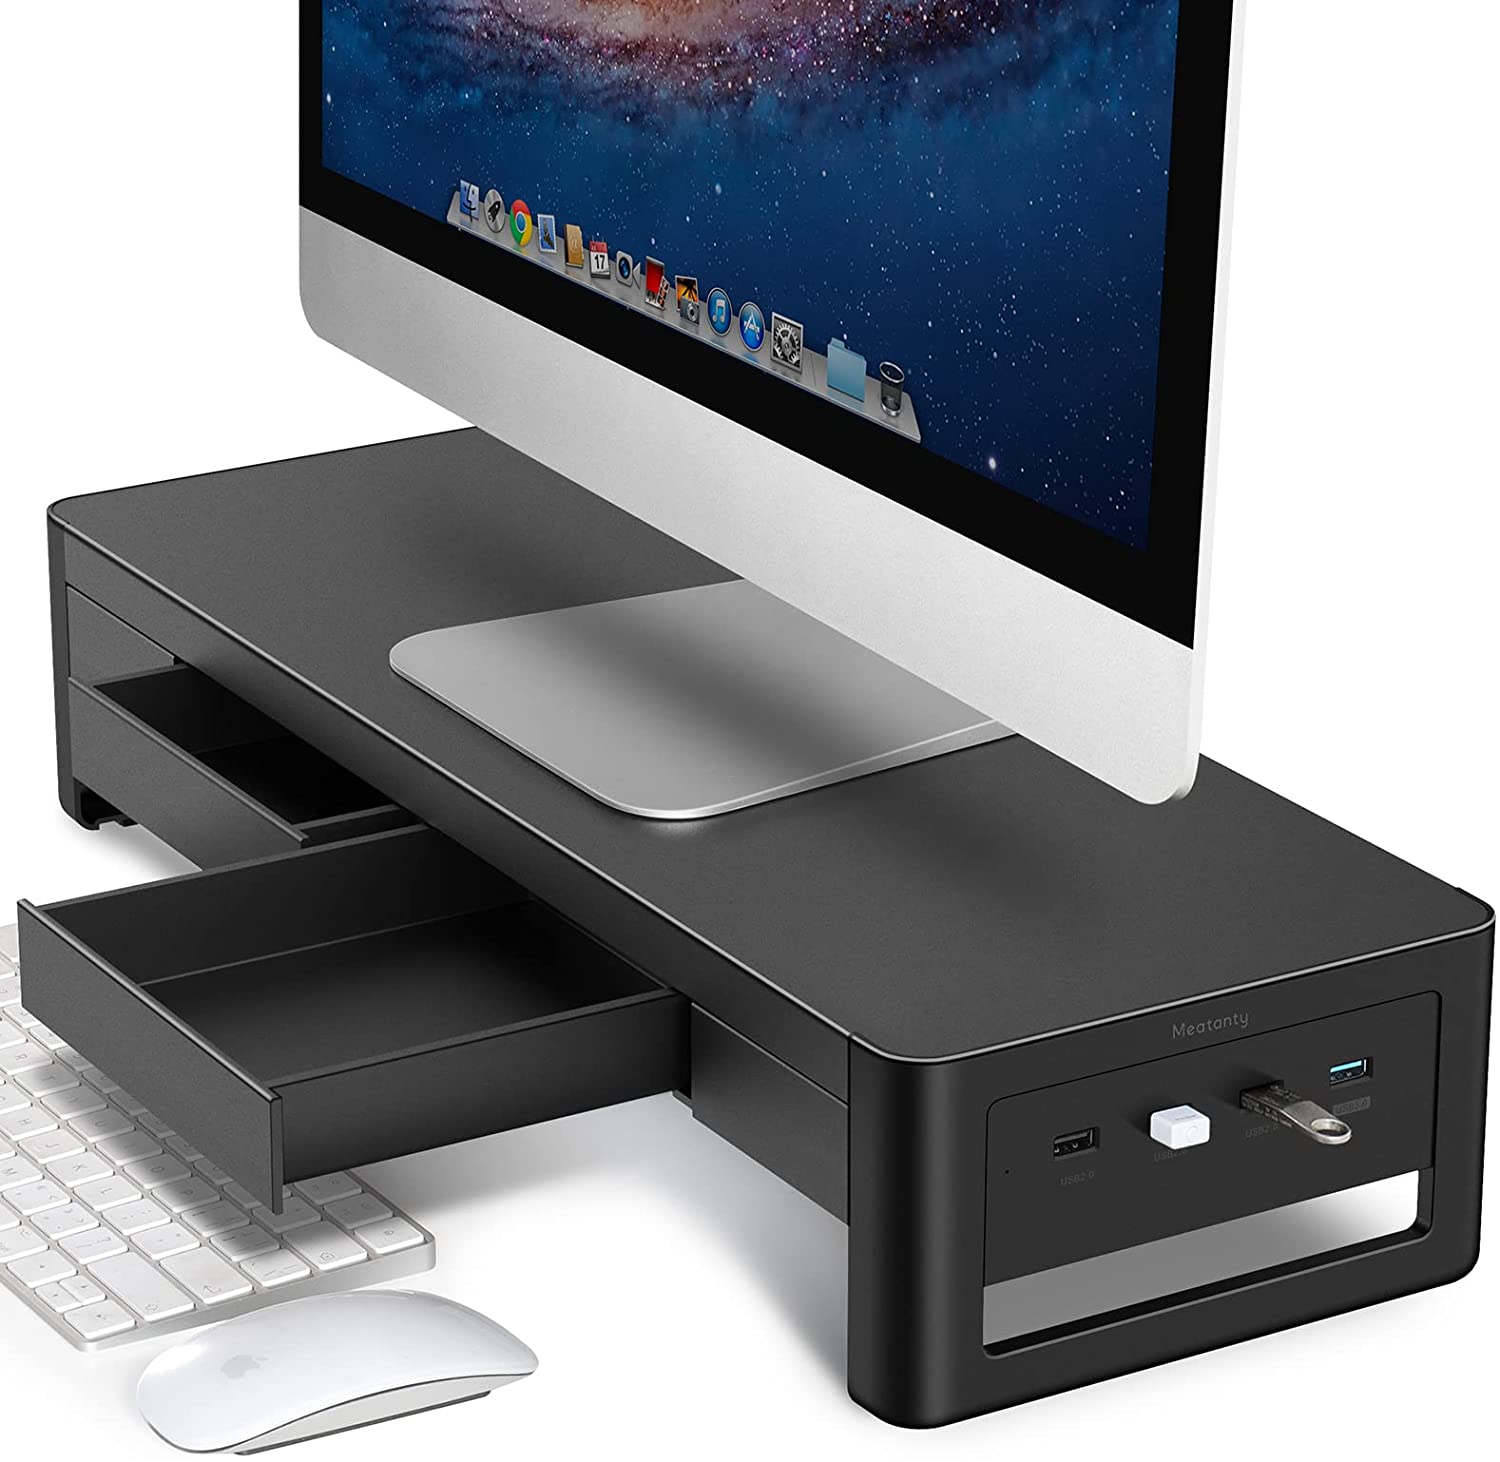 Vaydeer Monitor Stand features a wireless or USB charging station